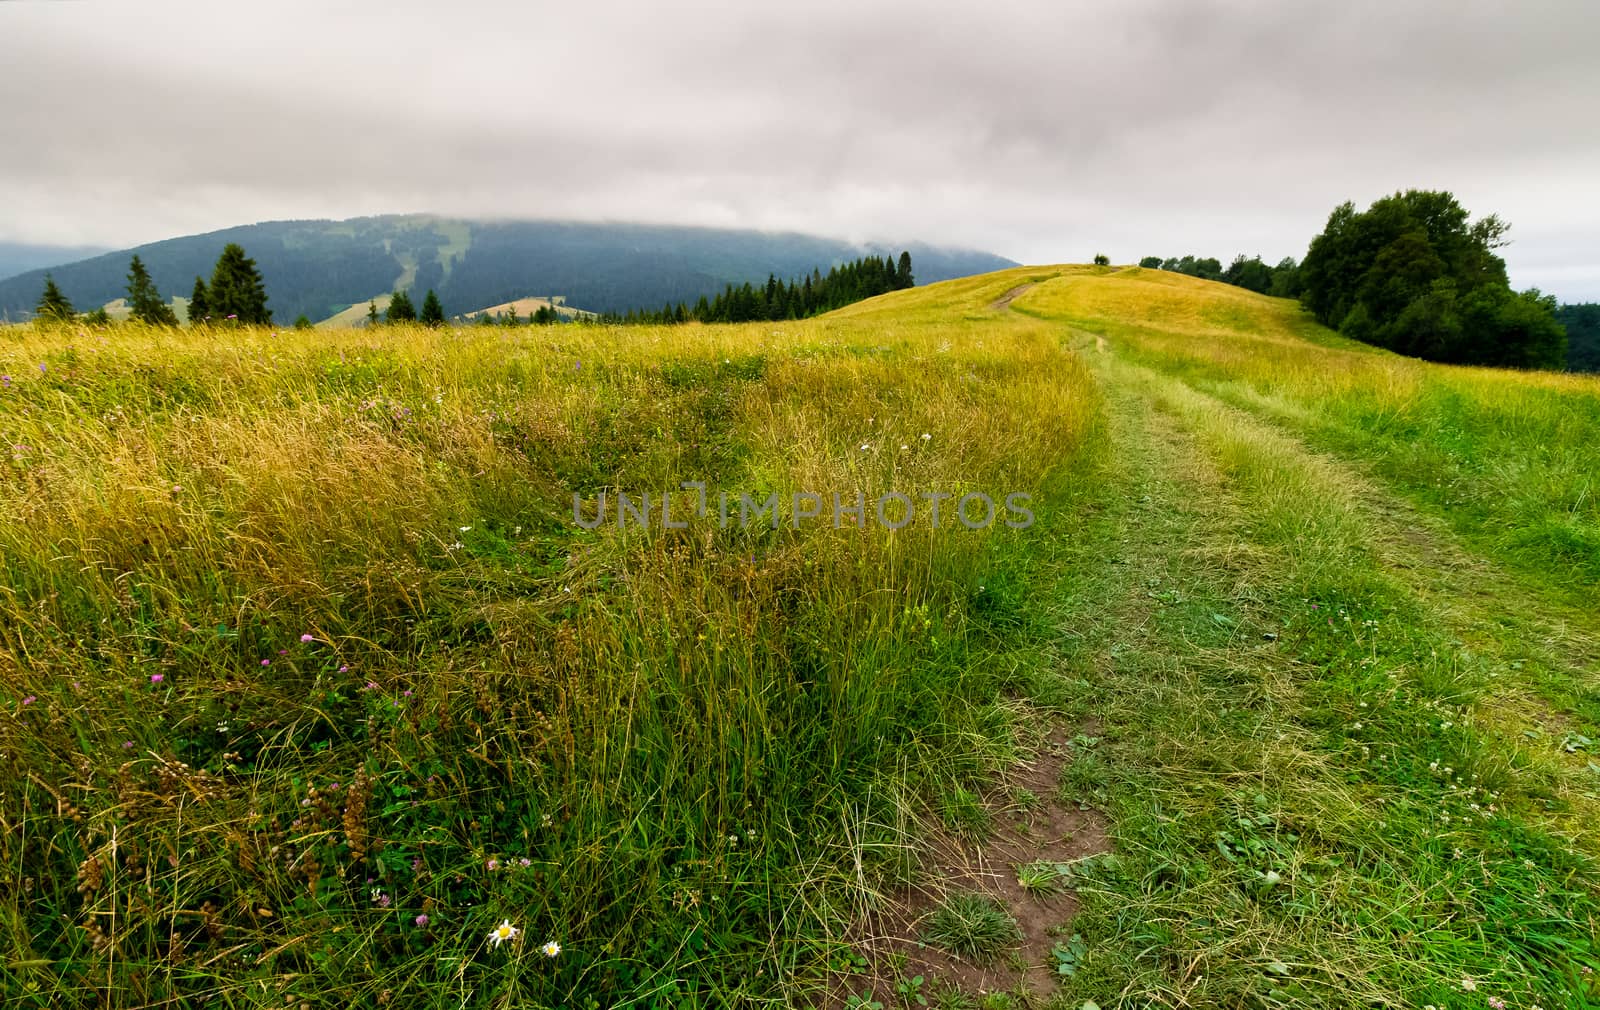 country road through grassy fields in mountains by Pellinni